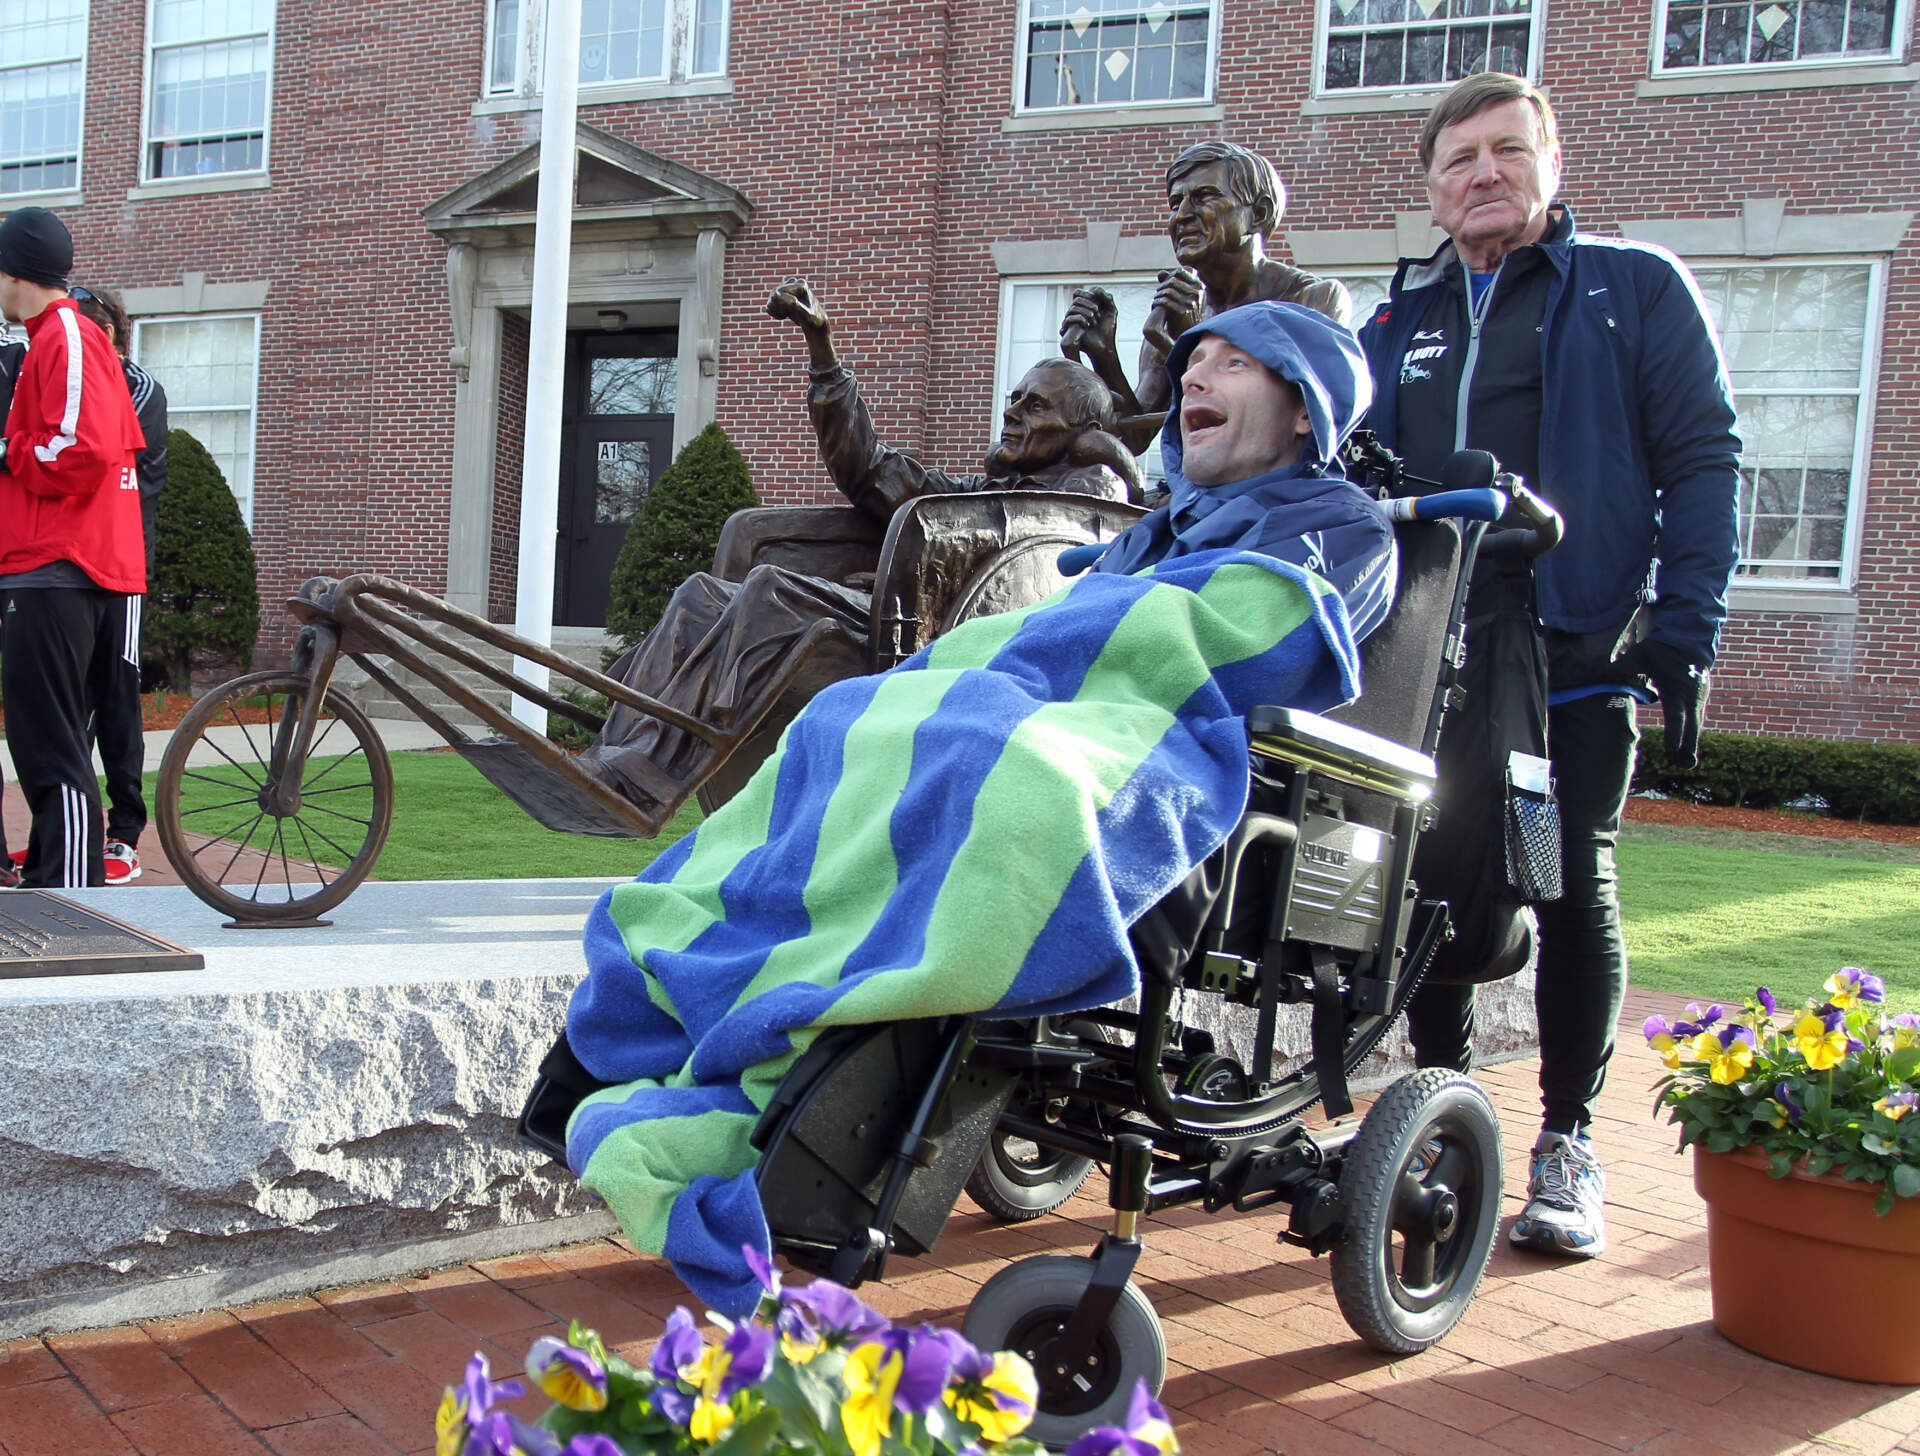 Dick Hoyt, right, and his son, Rick, stand next to a statue honoring them near the start of the 117th running of the Boston Marathon, in Hopkinton in 2013. (Stew Milne/AP)